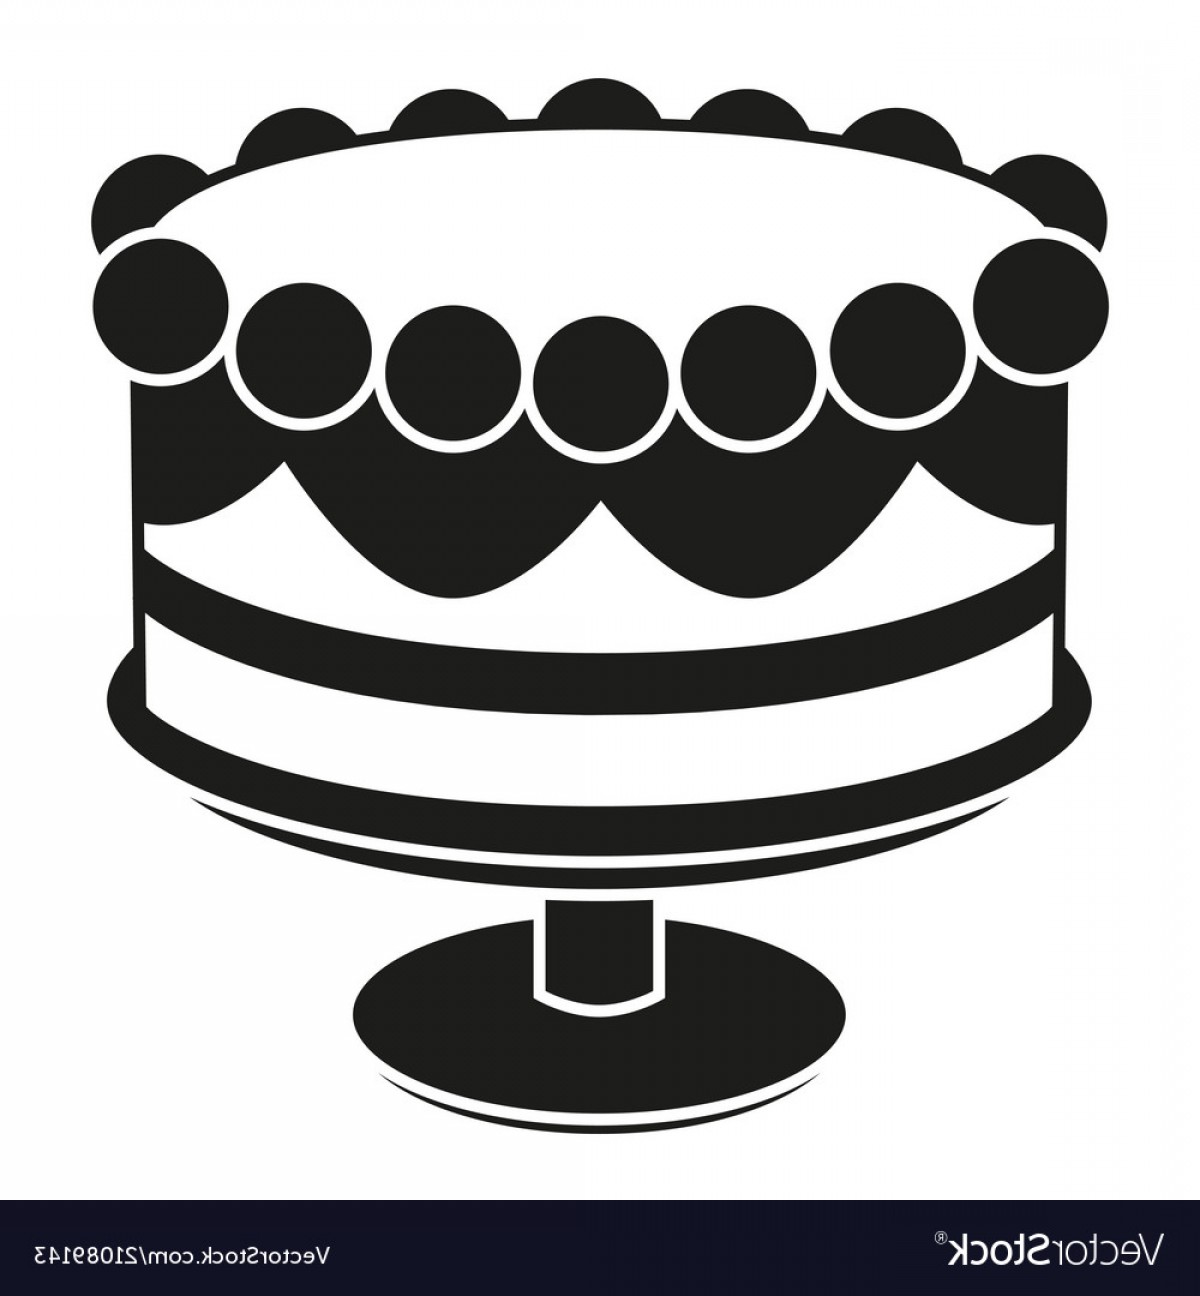 Download Cake Outline Vector at Vectorified.com | Collection of ...